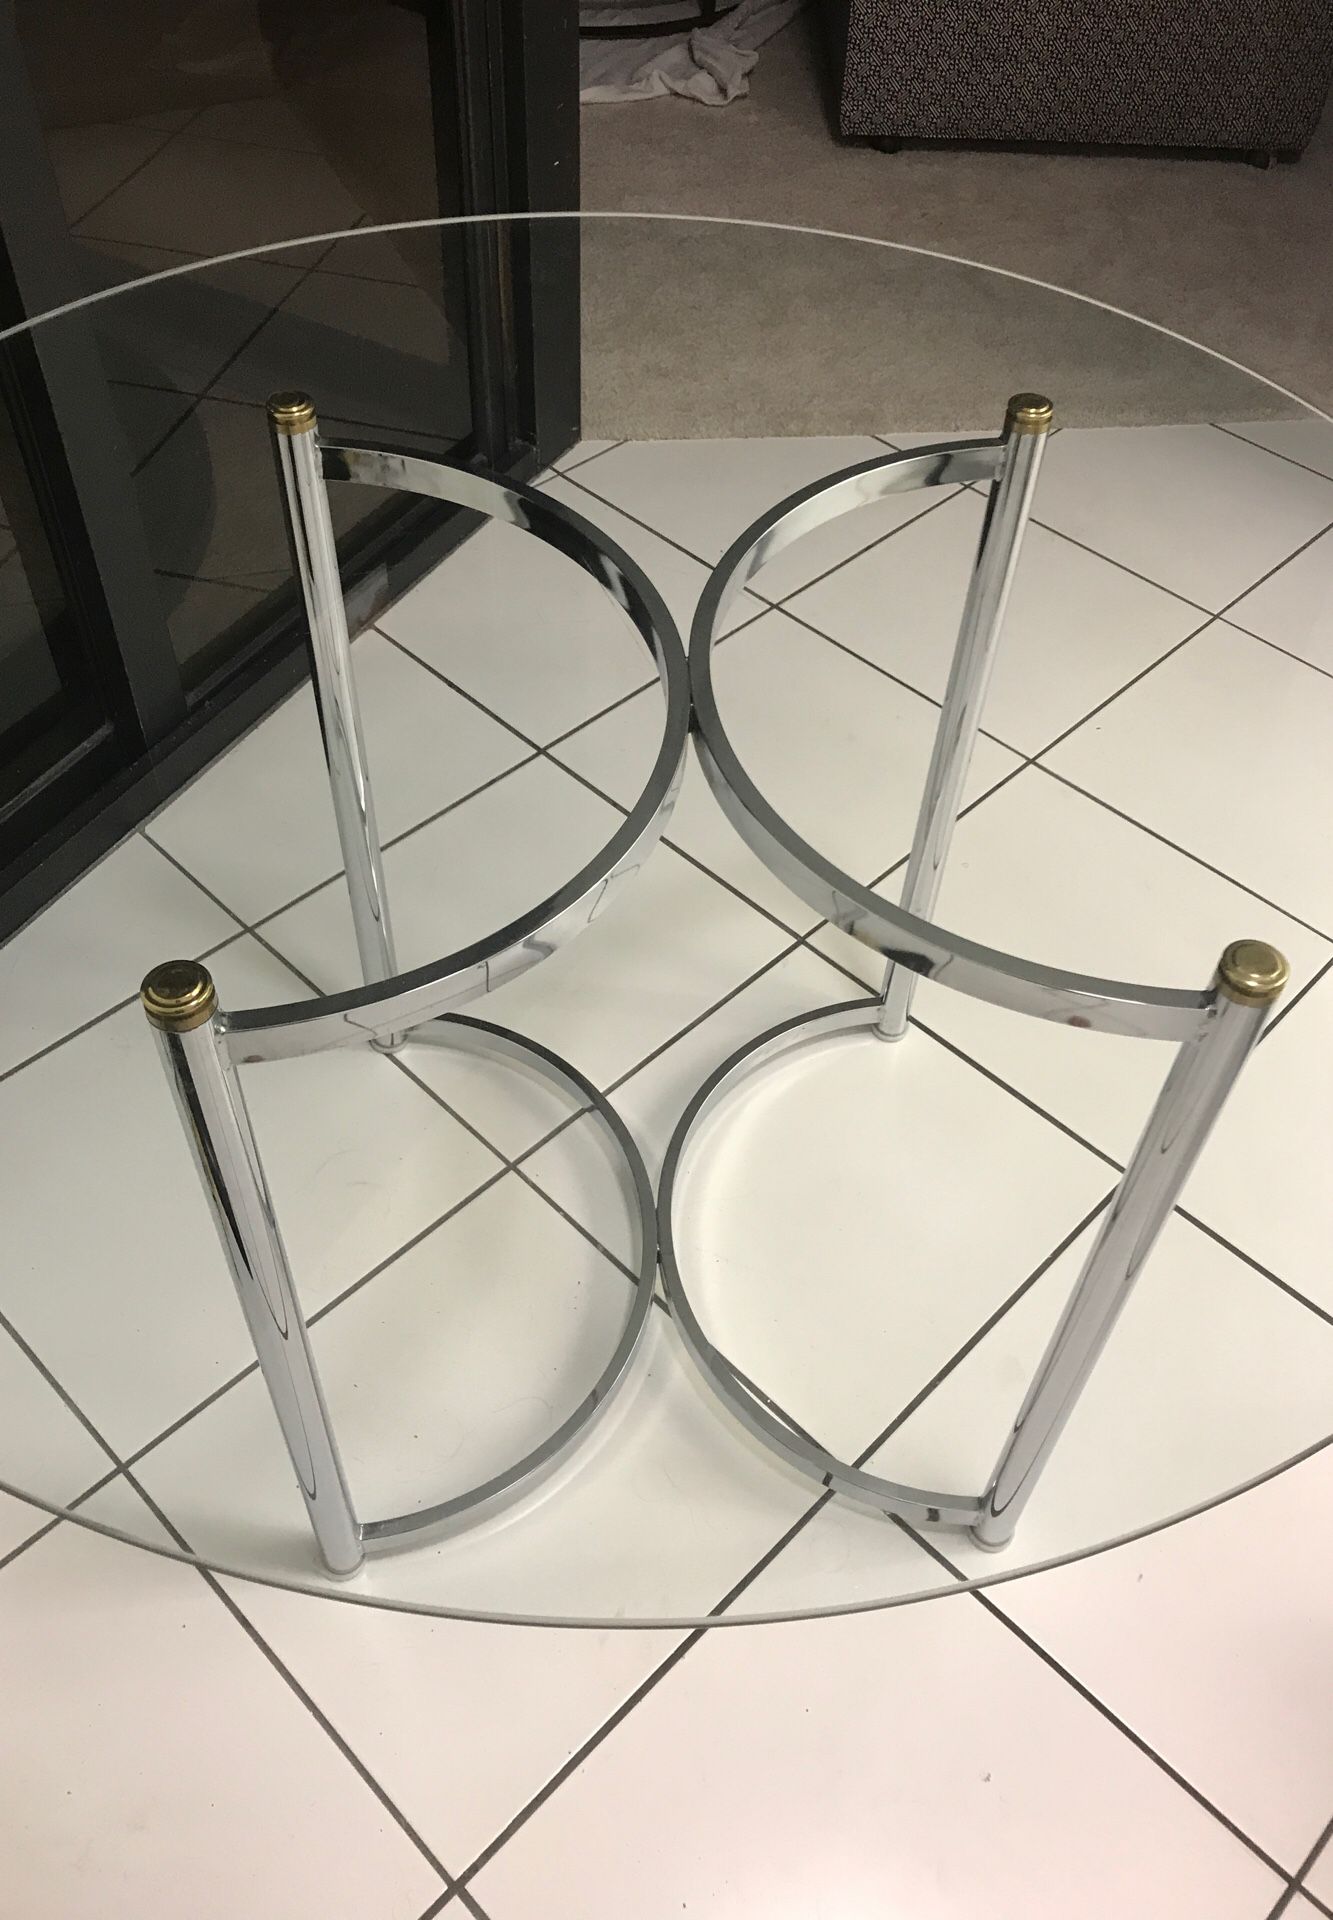 42” Round Glass Top Dining Table -Base with Chrome Legs and gold accents ( Horseshoe Pattern ) 27” High